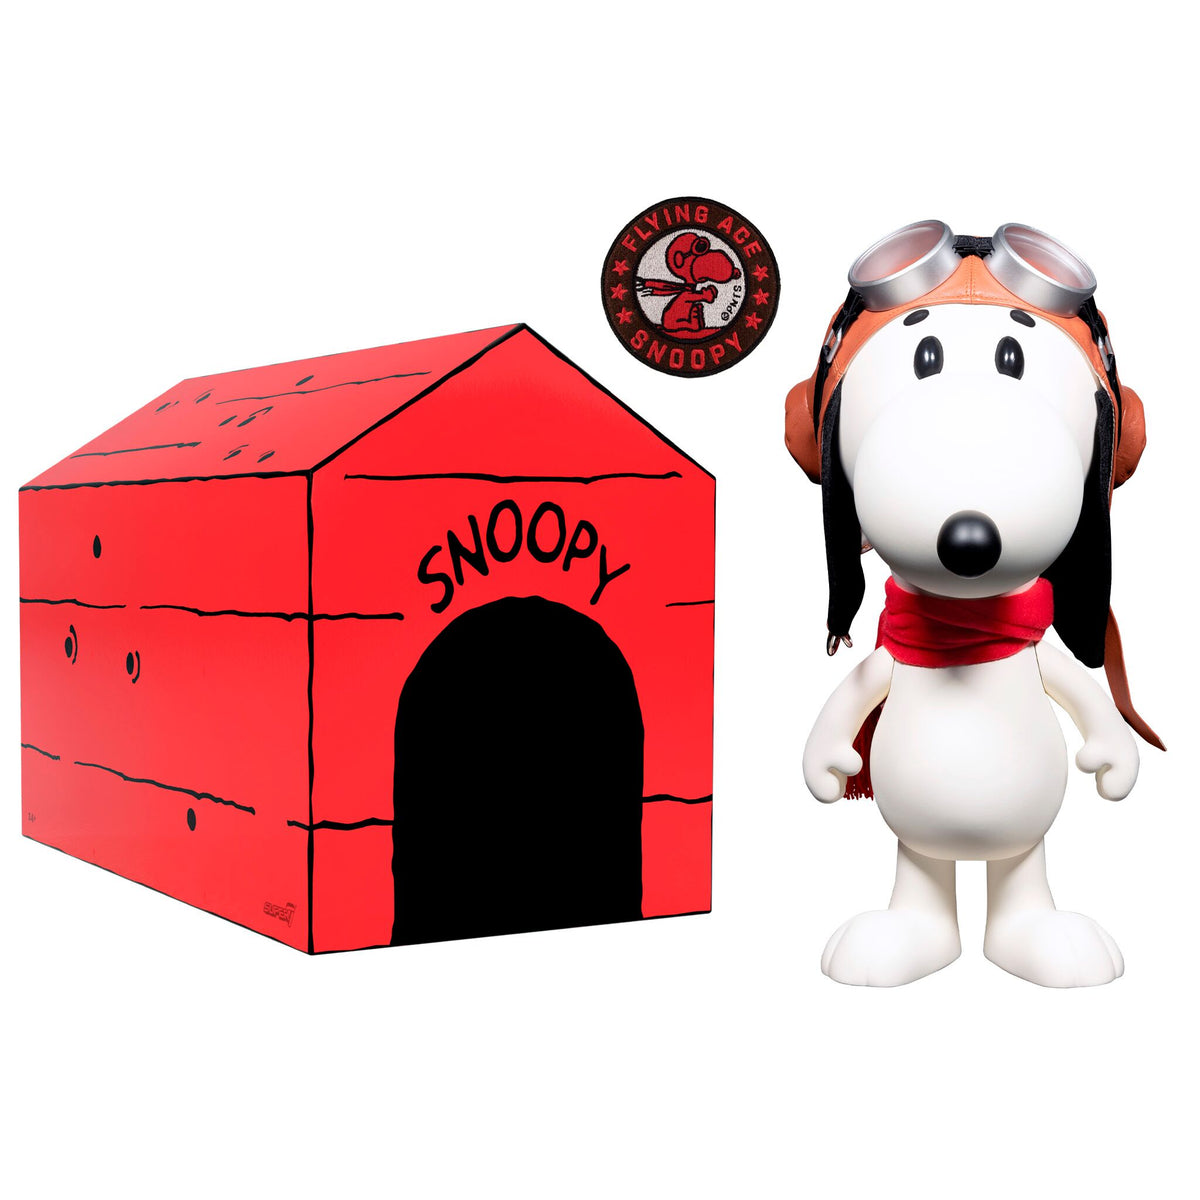 Peanuts Snoopy And The Doghouse' Sticker